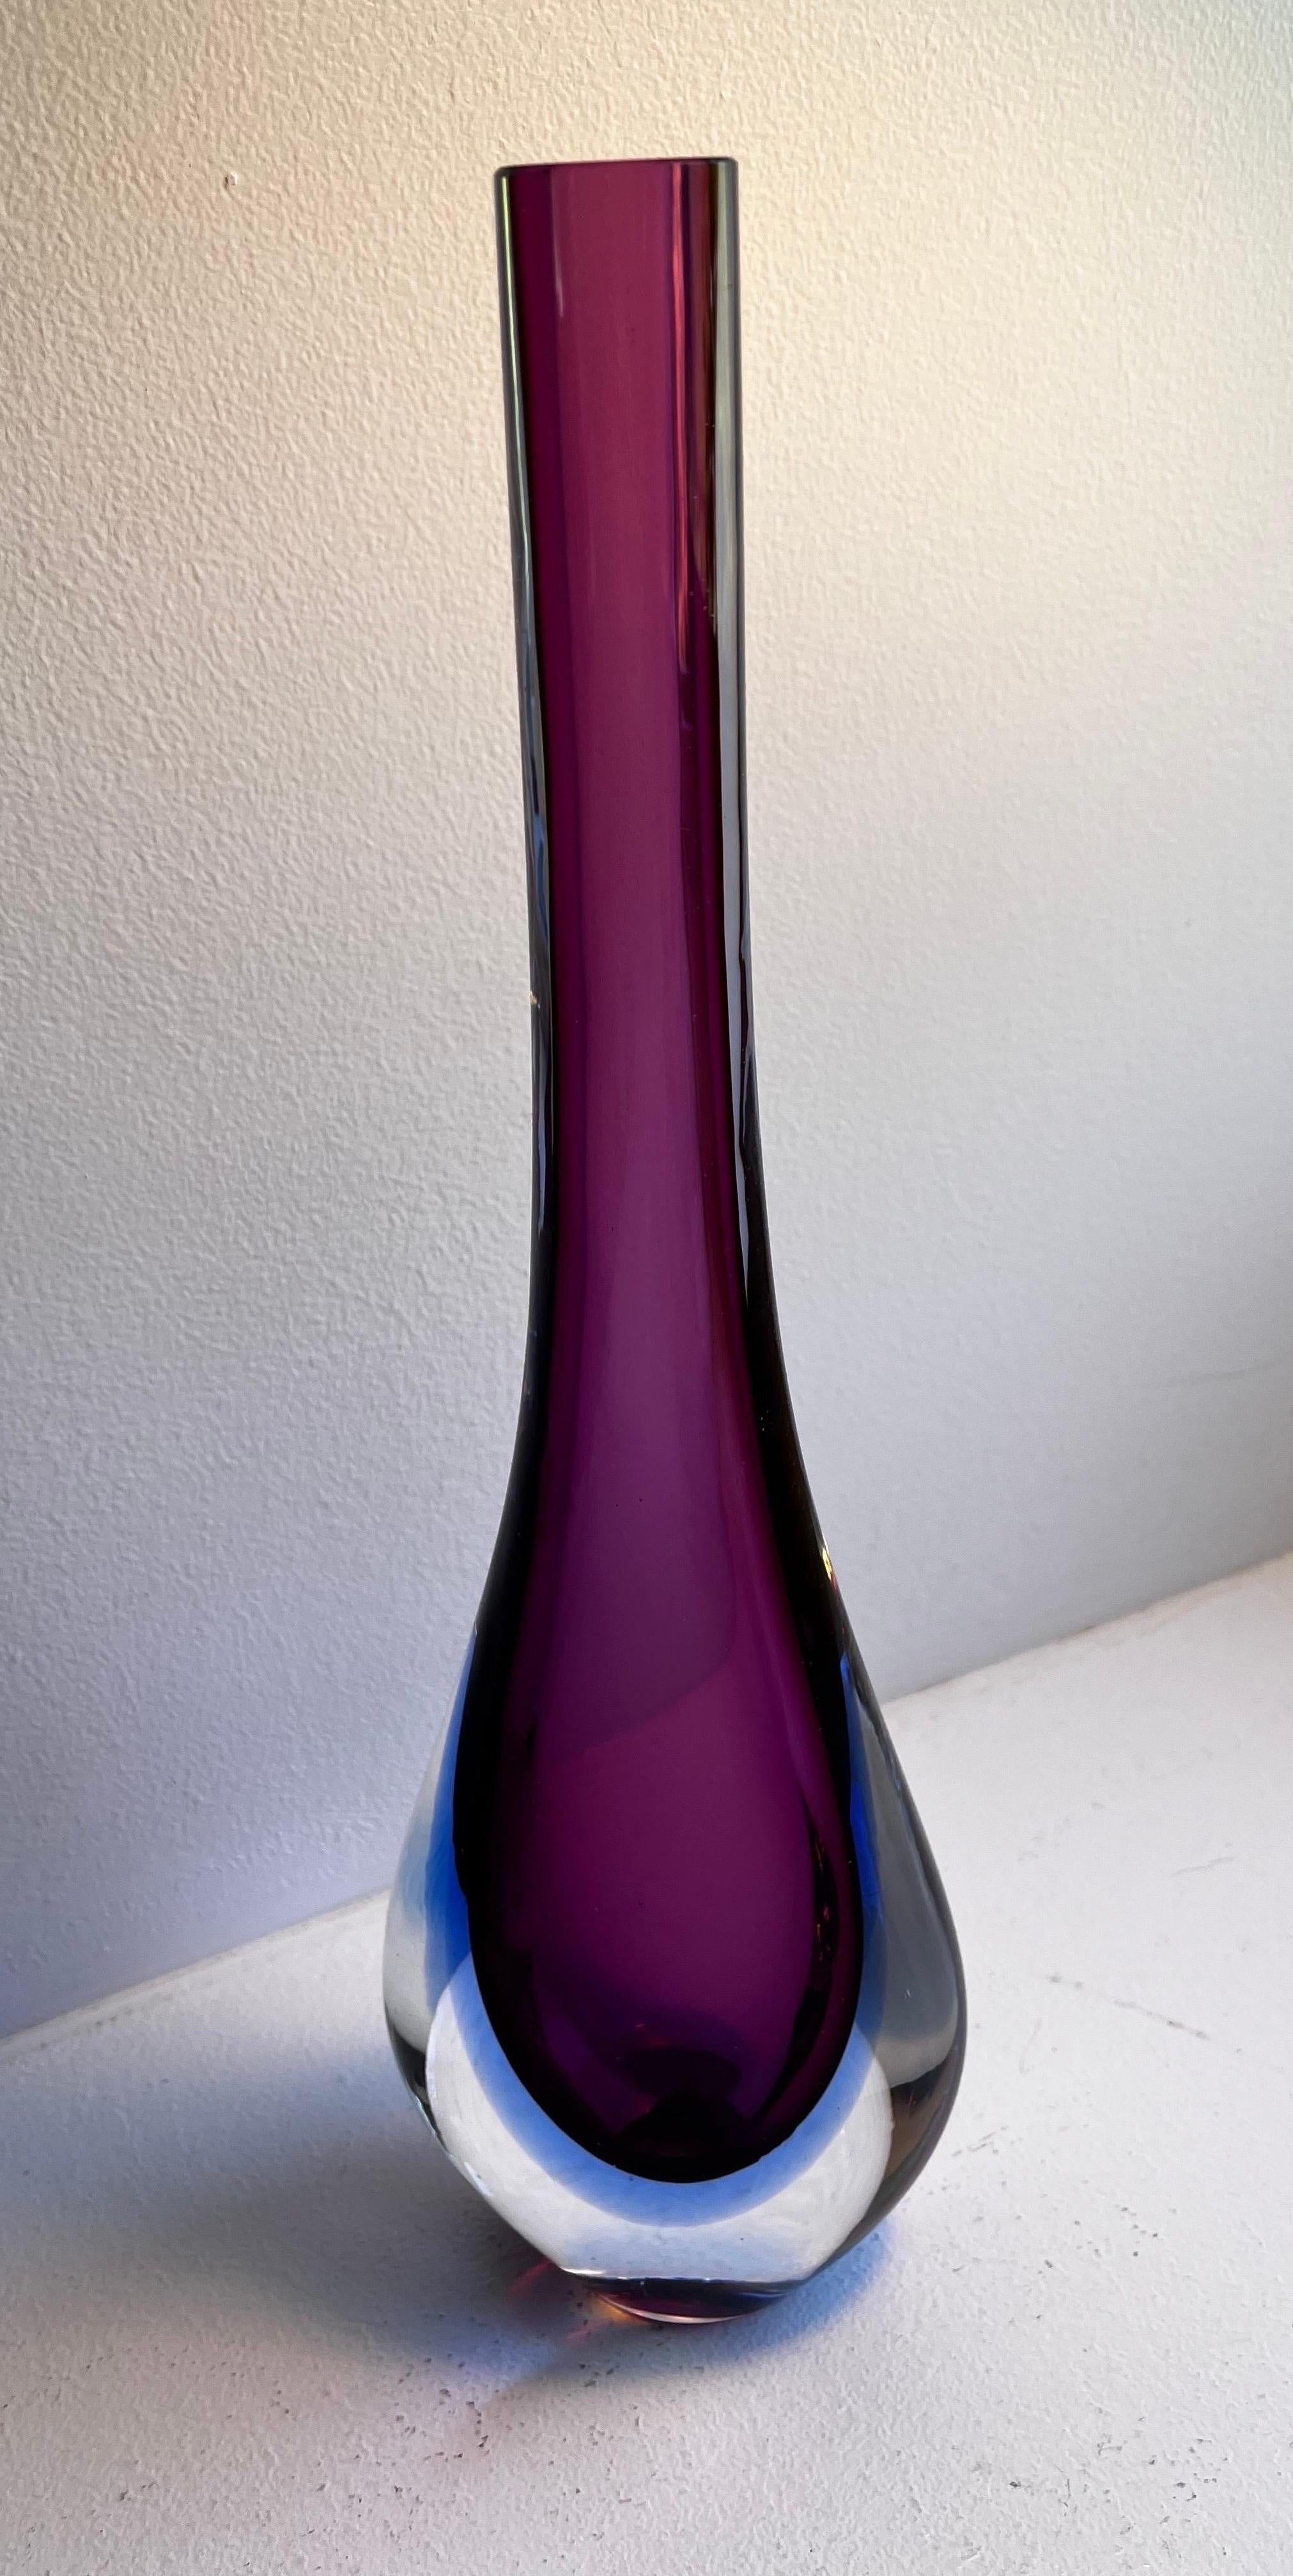 Murano Glass Sommerso Stem Vase

amethyst in blue sommerso
graceful teardrop shape
attributed Flavio Poli for Seguso Vetri d'Arte, Italy
unsigned
circa 1960s.